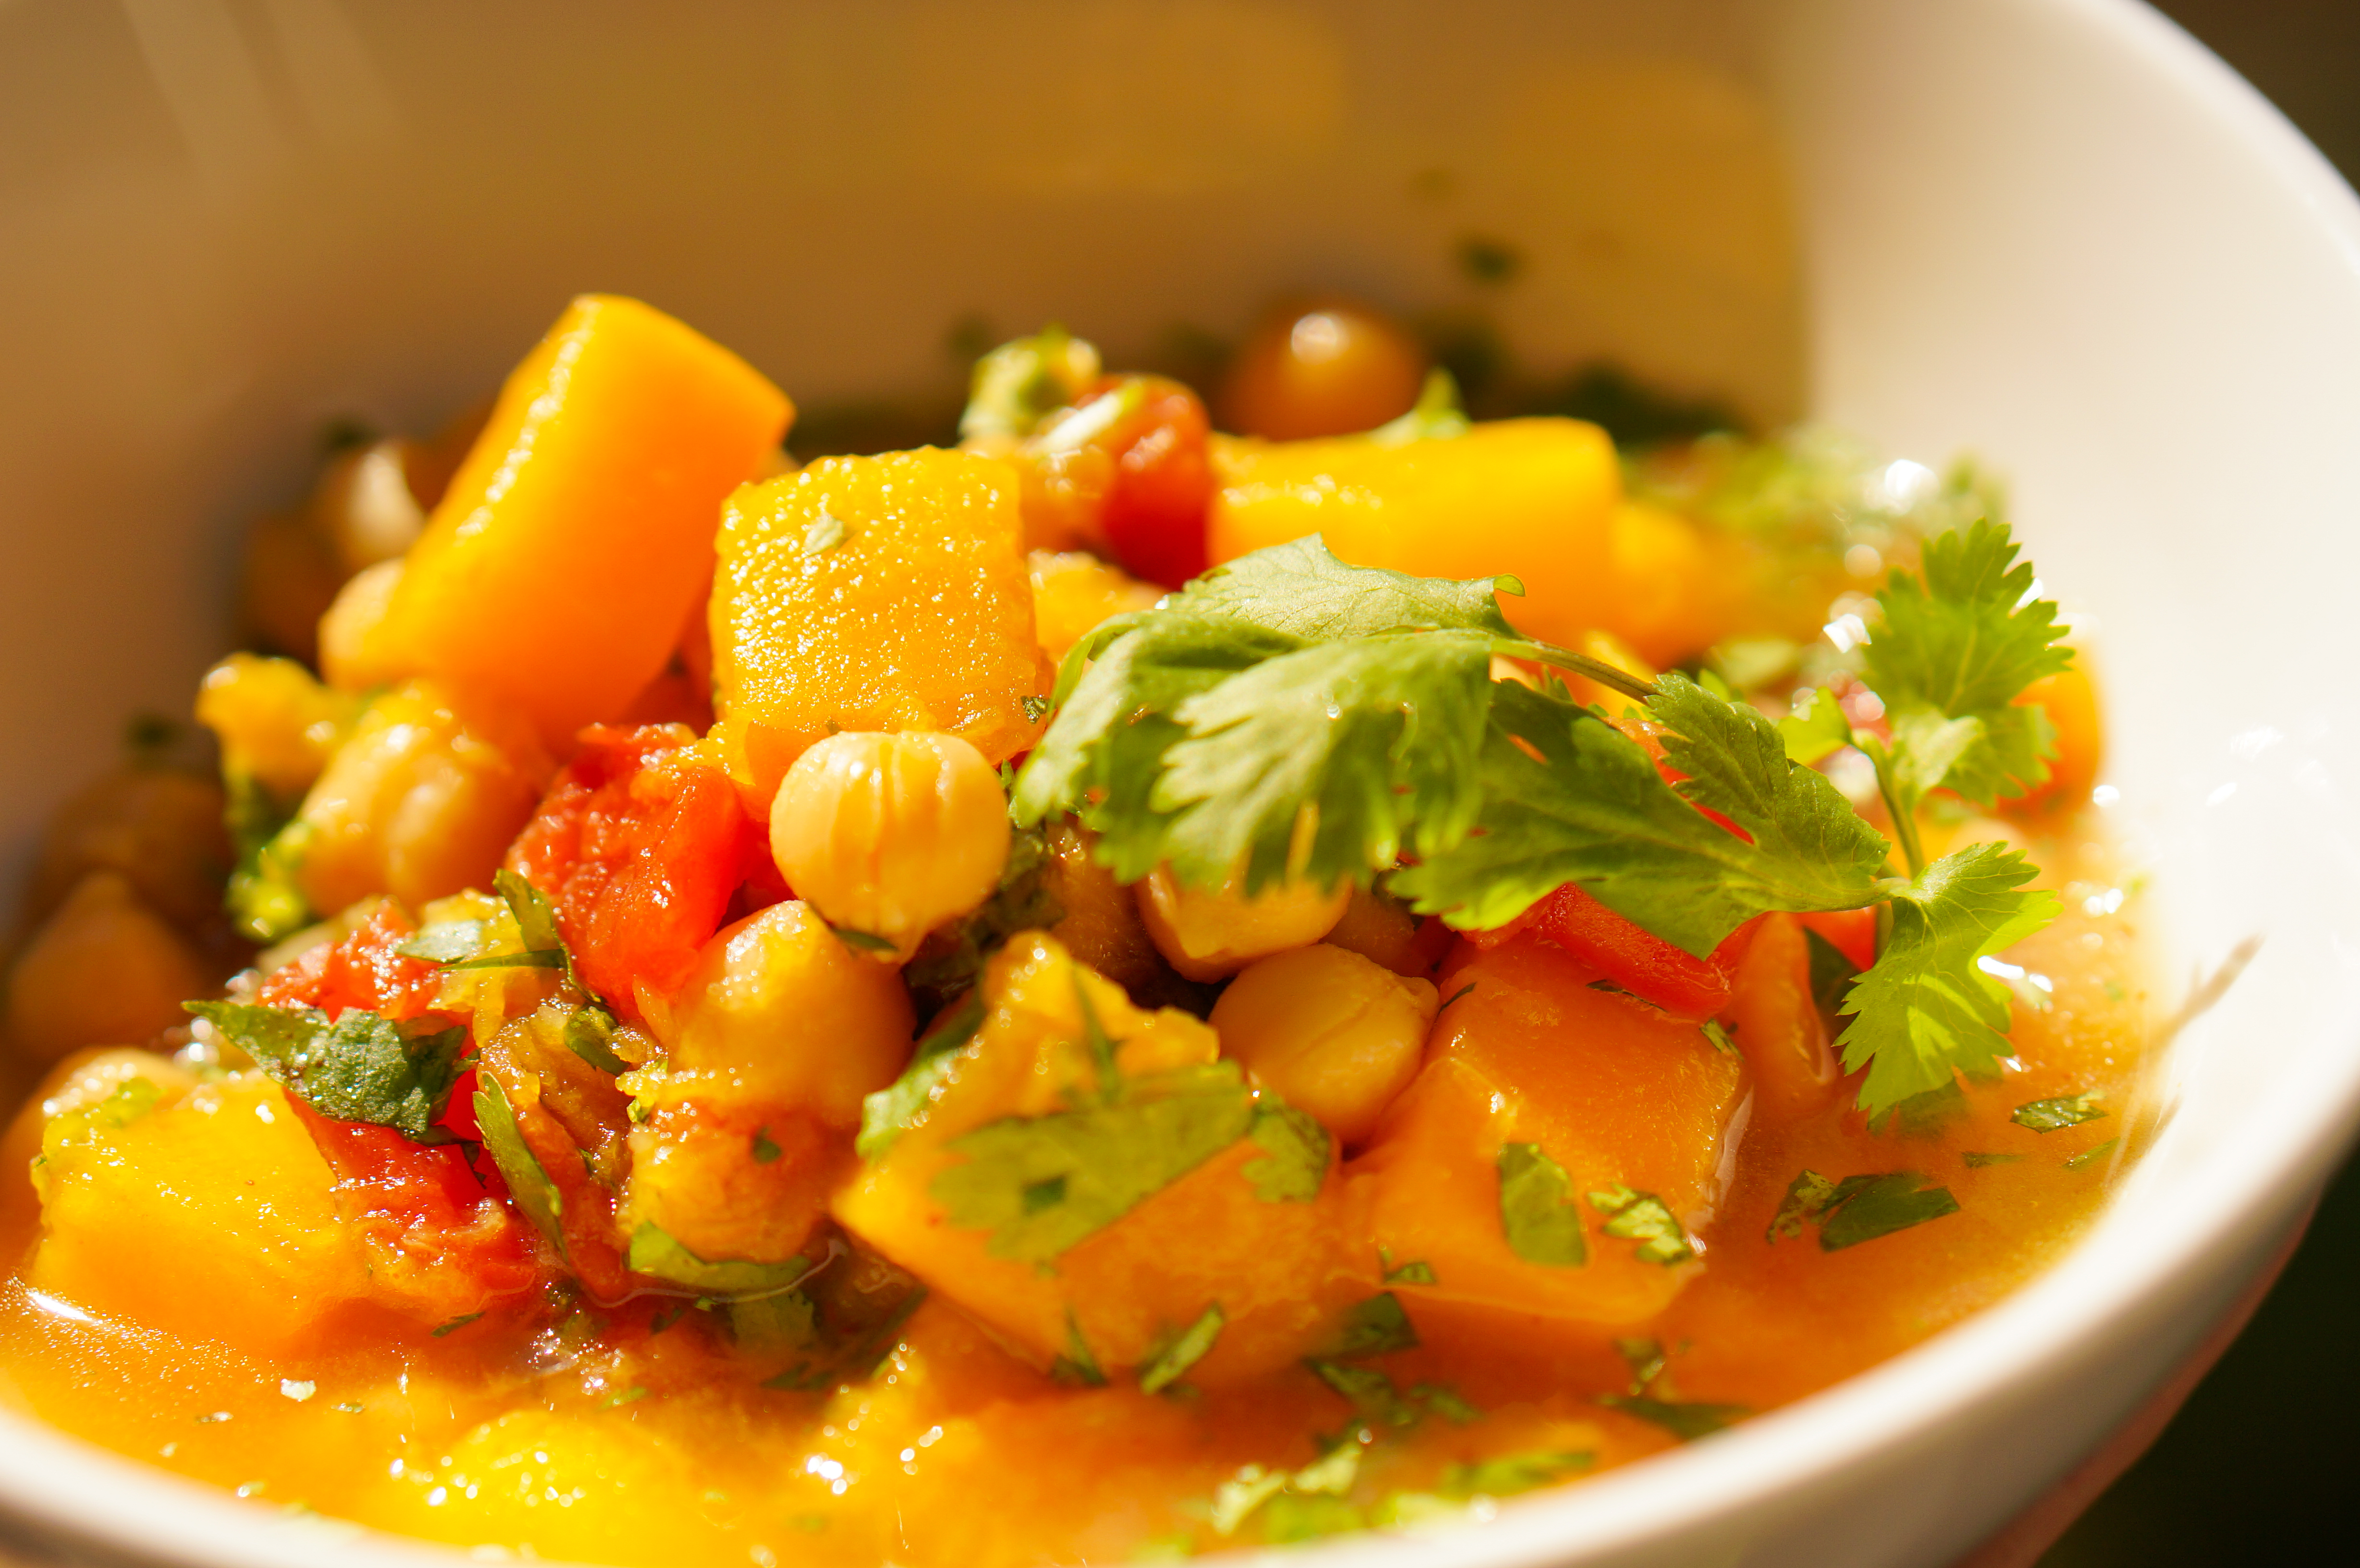 Moroccan Butternut squash and Chickpea Stew